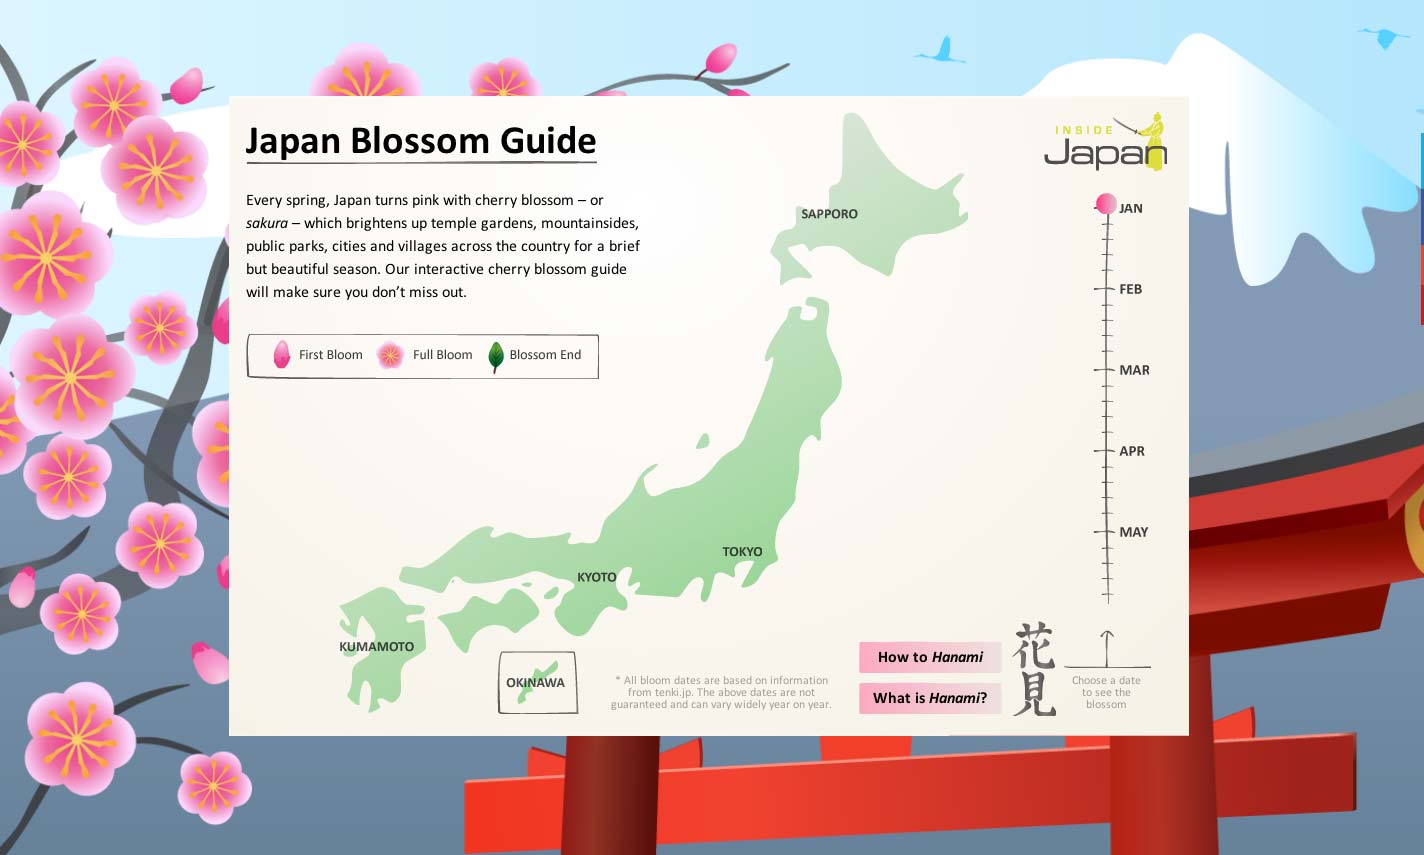 <p>The cherry blossom season in Japan usually begins in Okinawa in around January/February, passes through the middle of Japan in March and April, and finishes with a late bloom in northern Hokkaido in May. In areas of high altitude, the blossom also arrives rather later than in low-altitude regions.</p>

<p>Tokyo usually sees its first blossoms in the dying days of March, with full bloom falling around April 5. Kyoto follows a day or two later, while the mountainous areas around Takayama and Matsumoto bloom about two weeks later - beginning in mid-April.</p>
